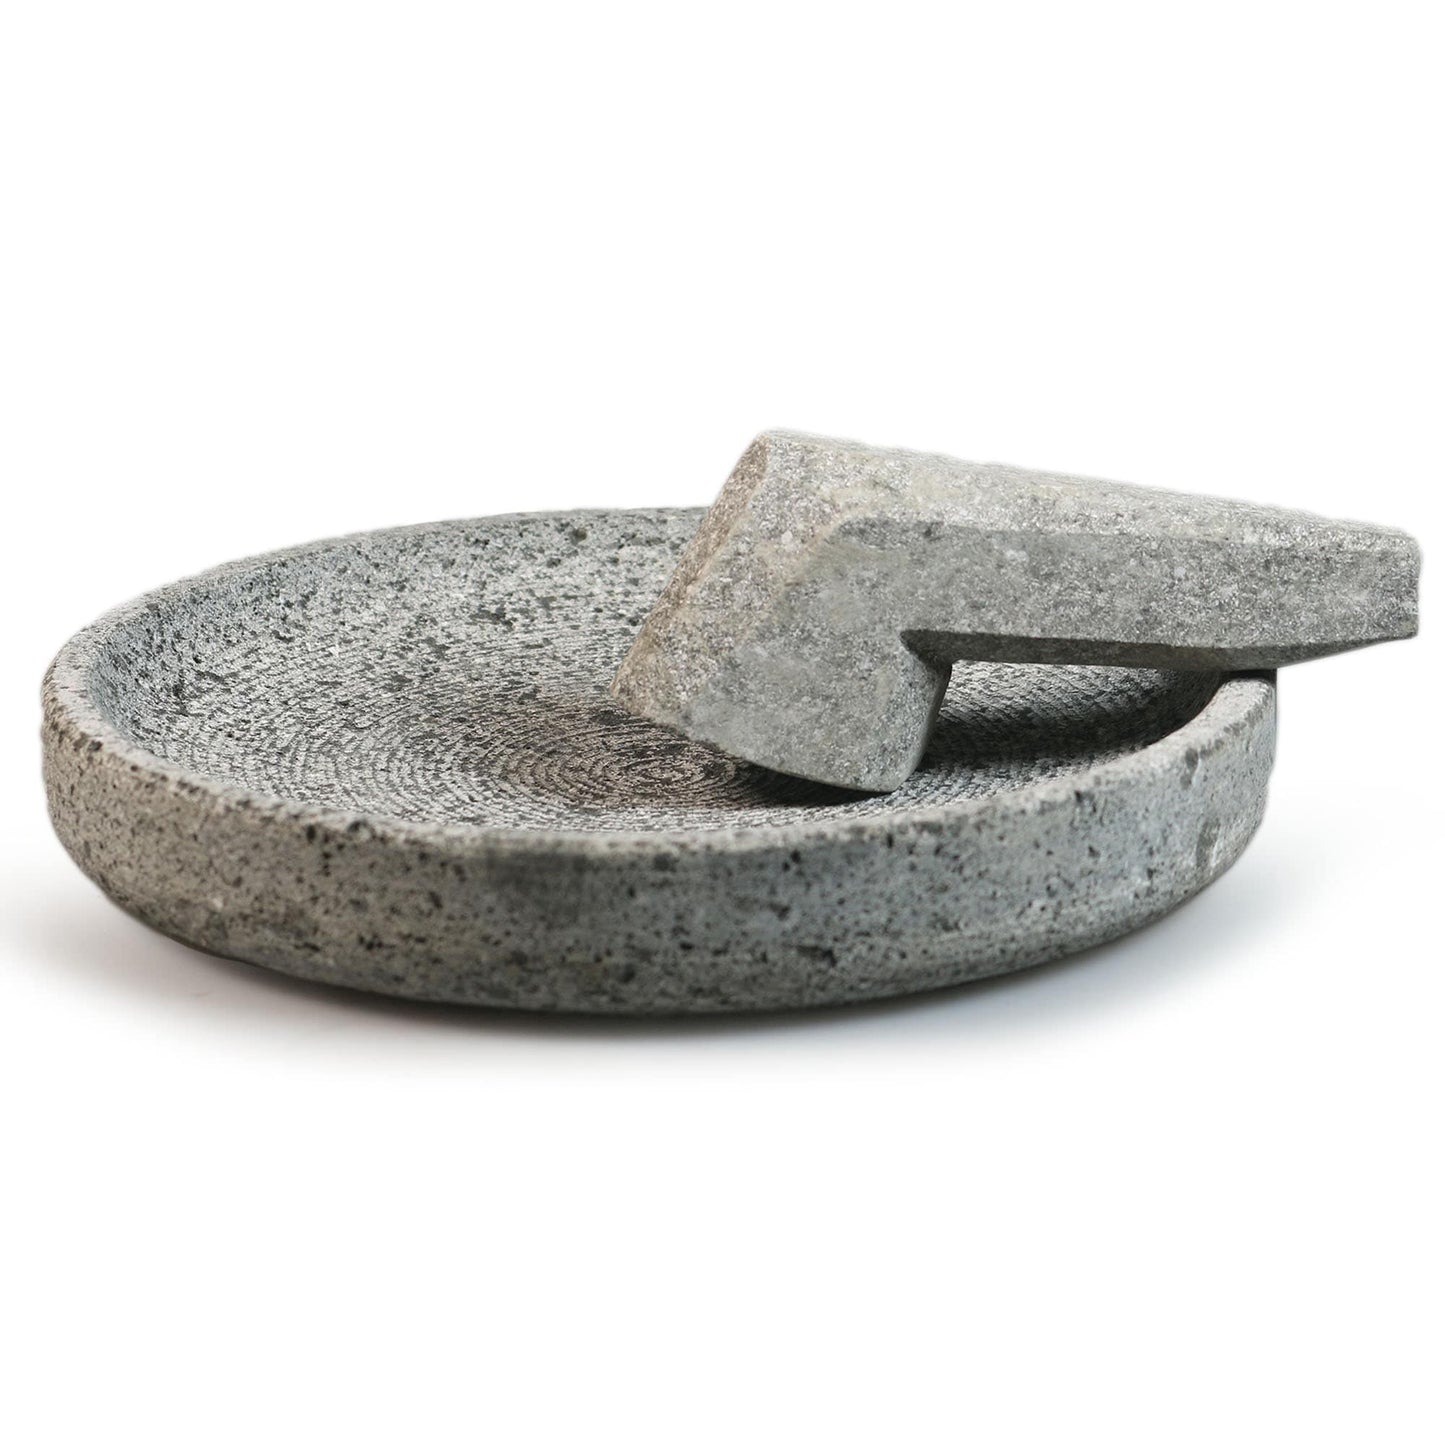 Cobek mortar made of volcanic rock - traditional crushing and grinding in a modern design